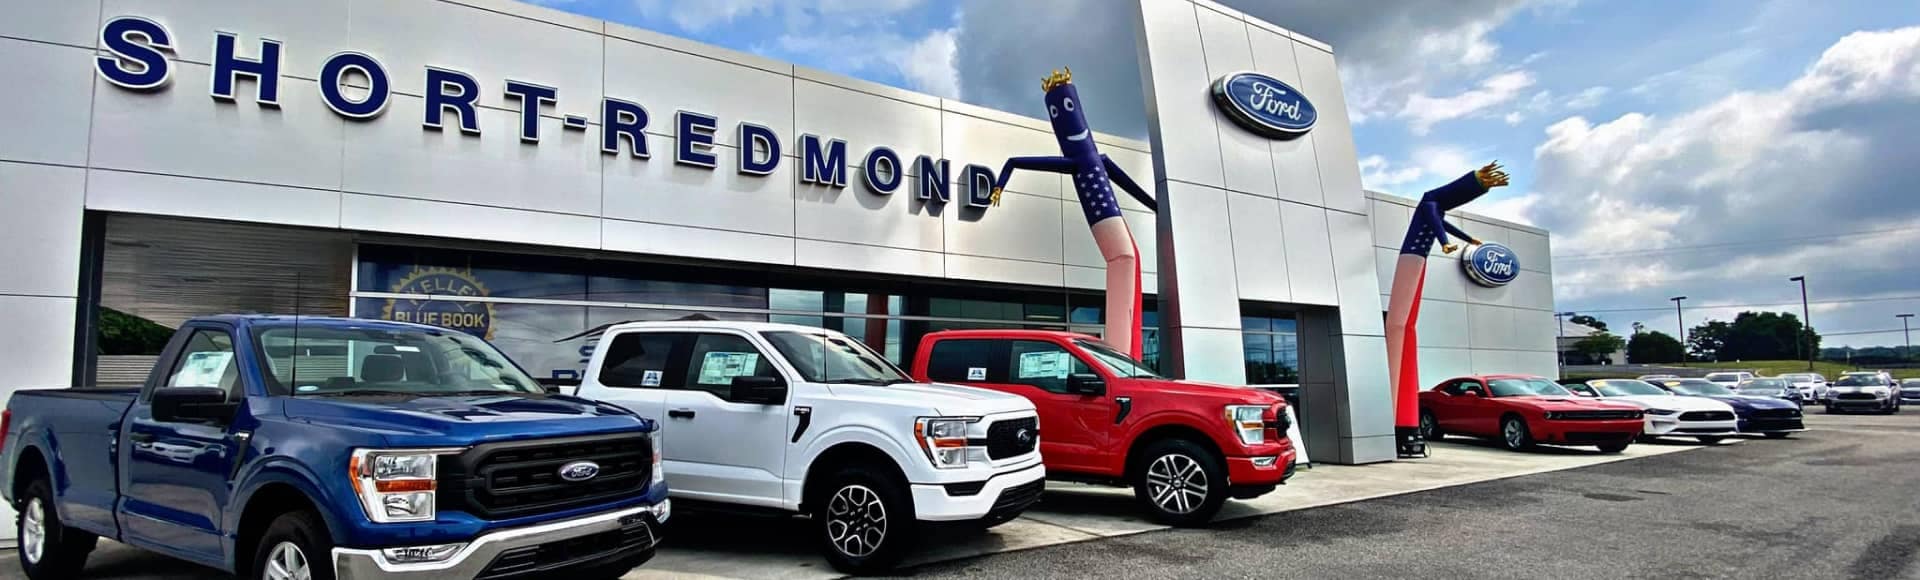 Short-Redmond Ford Dealership Exterior View with an American flag patterned whacky waving inflatable arm flailing tube man